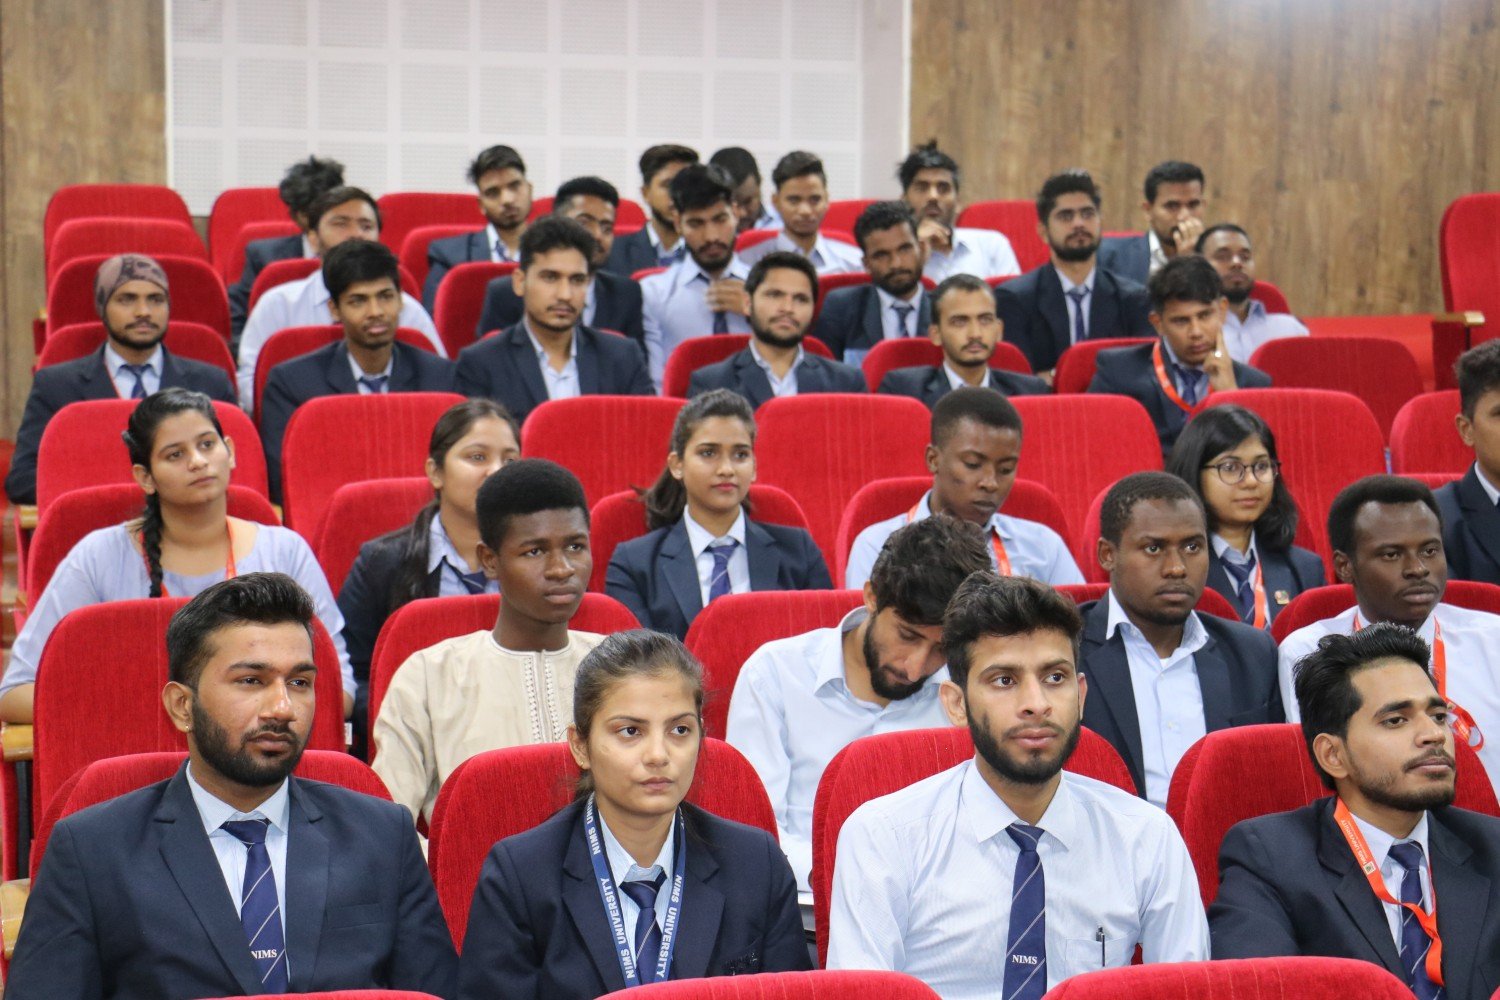 Session Photo National Institute of Medical Sciences University in Jaipur